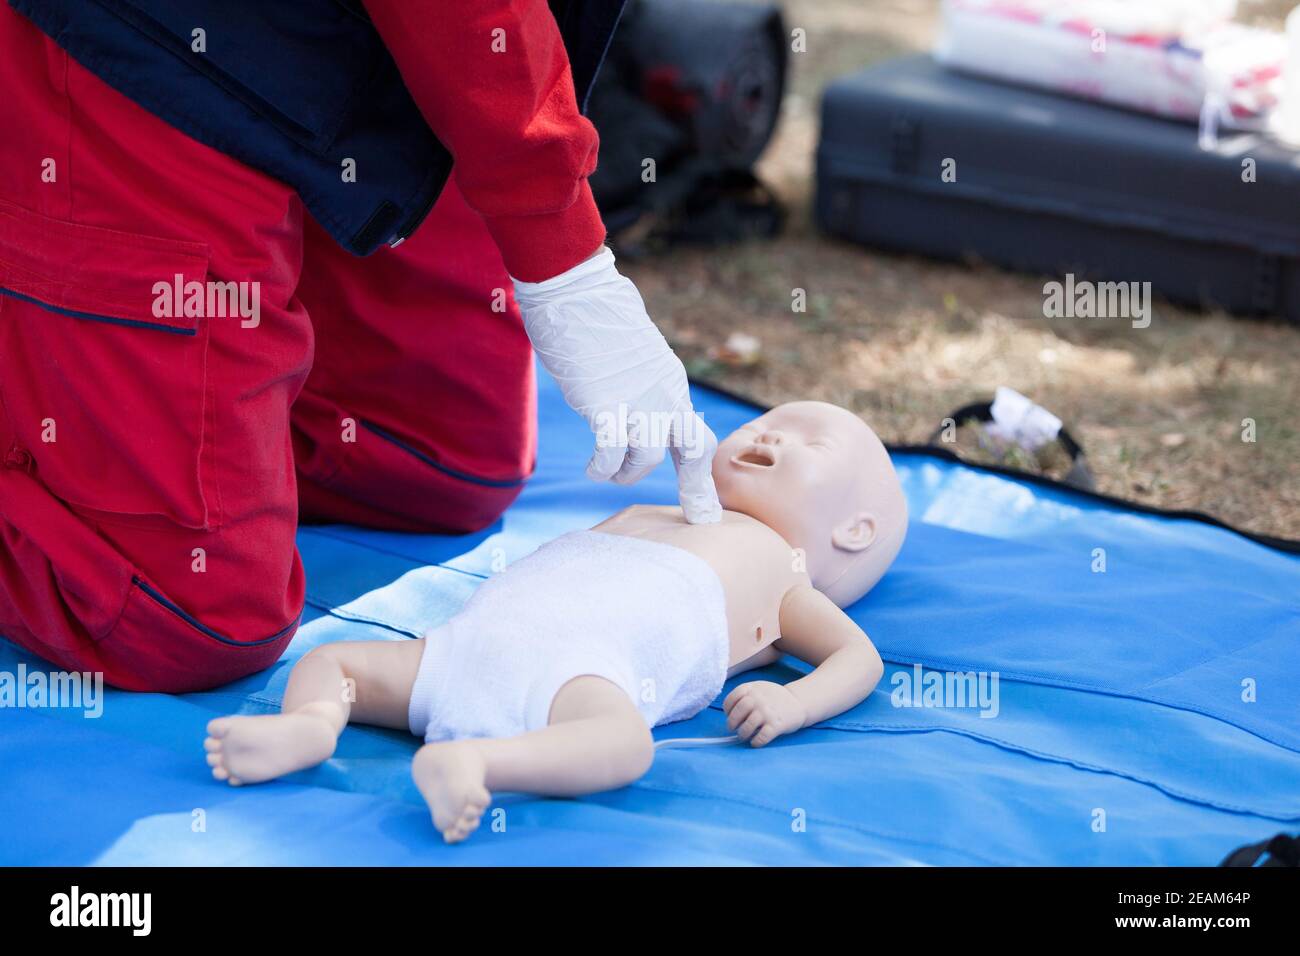 Baby CPR dummy first aid training. Heart massage. Stock Photo